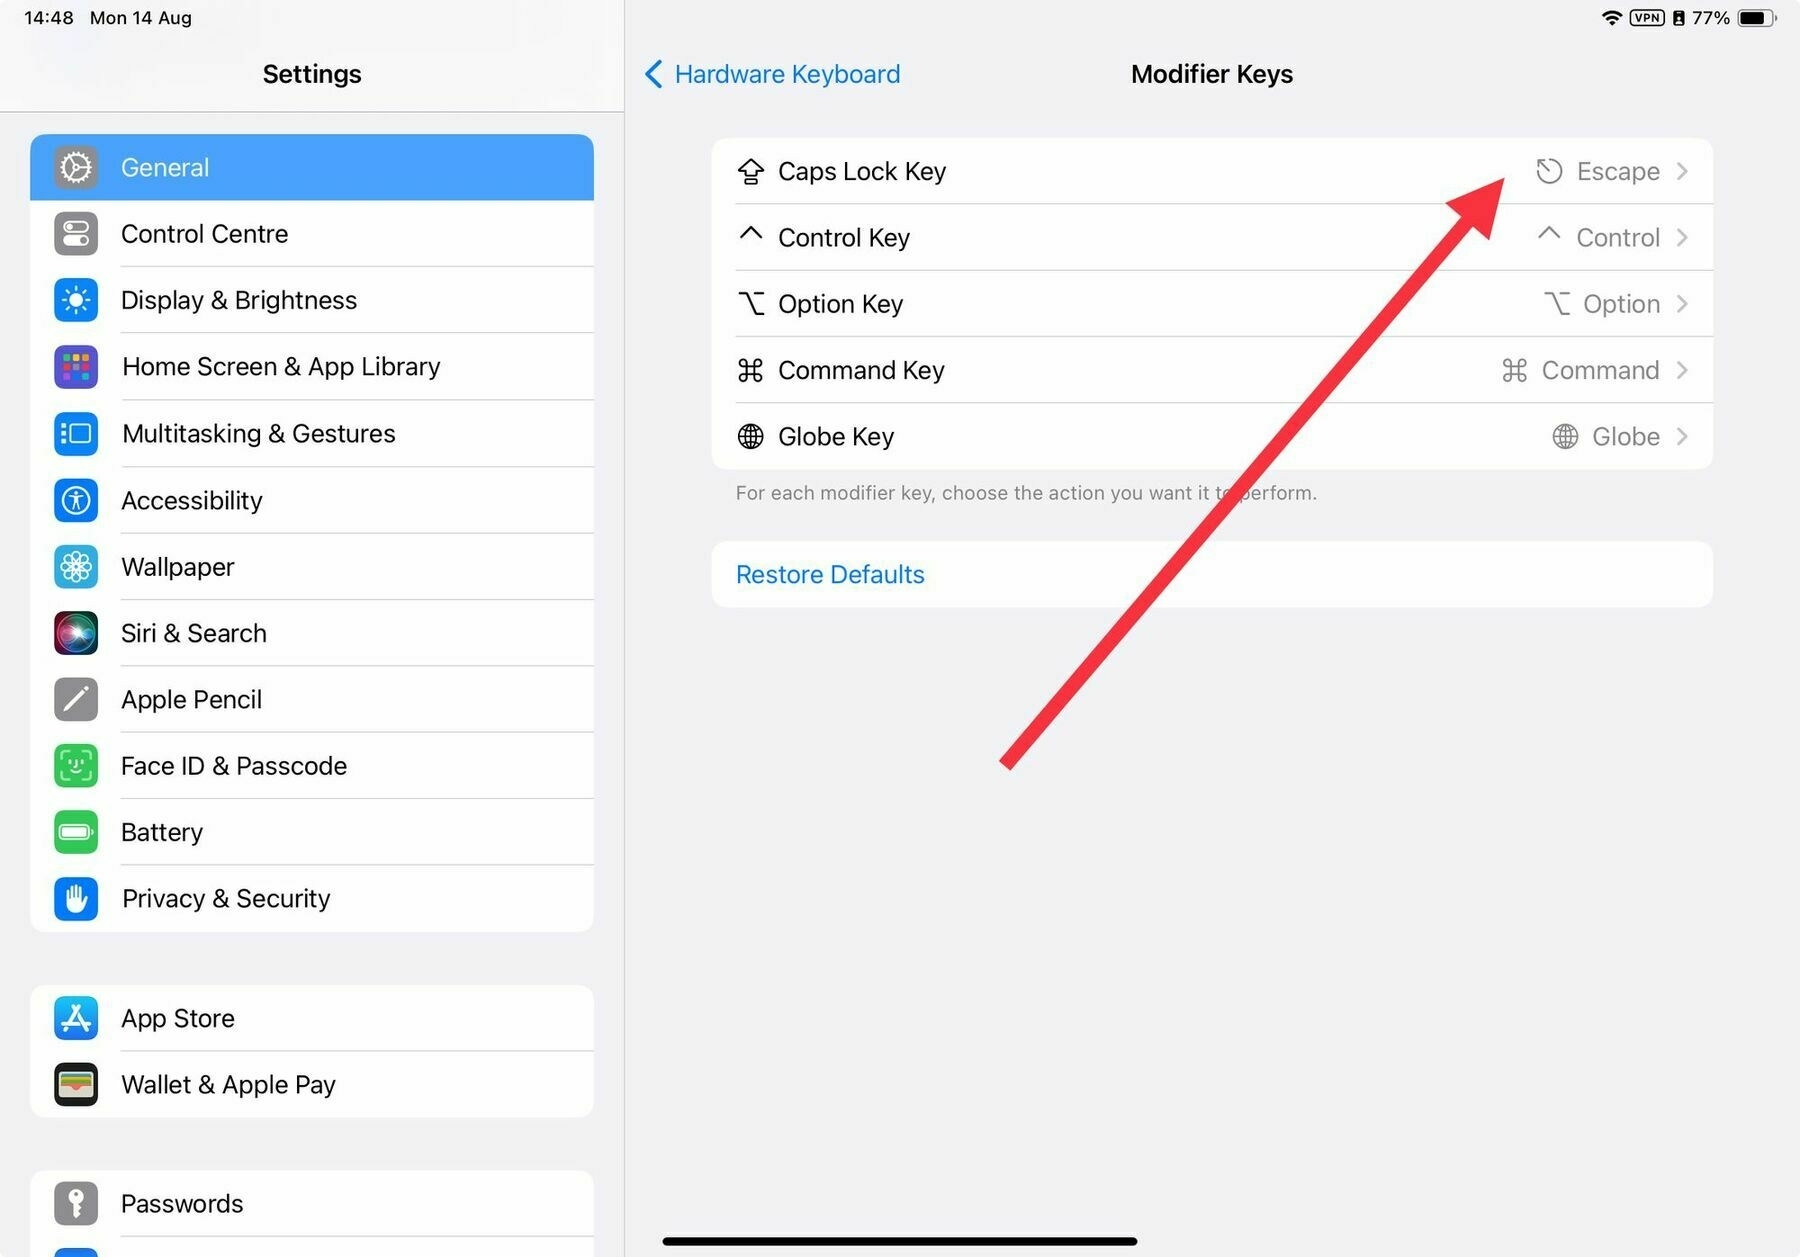 Mapping the Escape key to Caps Lock in iPadOS Settings